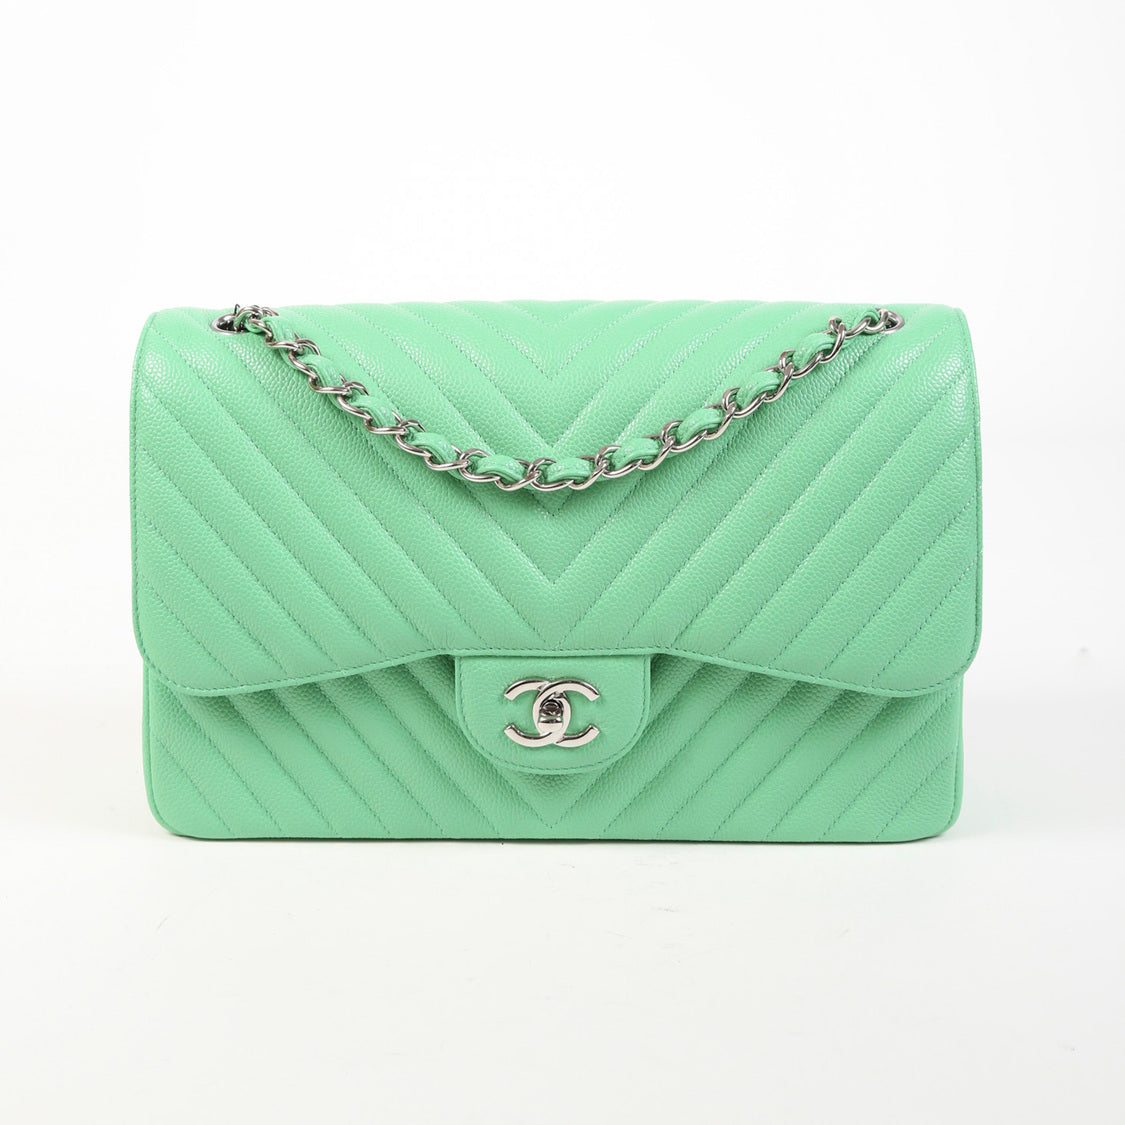 CHANEL Green Bags & Handbags for Women, Authenticity Guaranteed